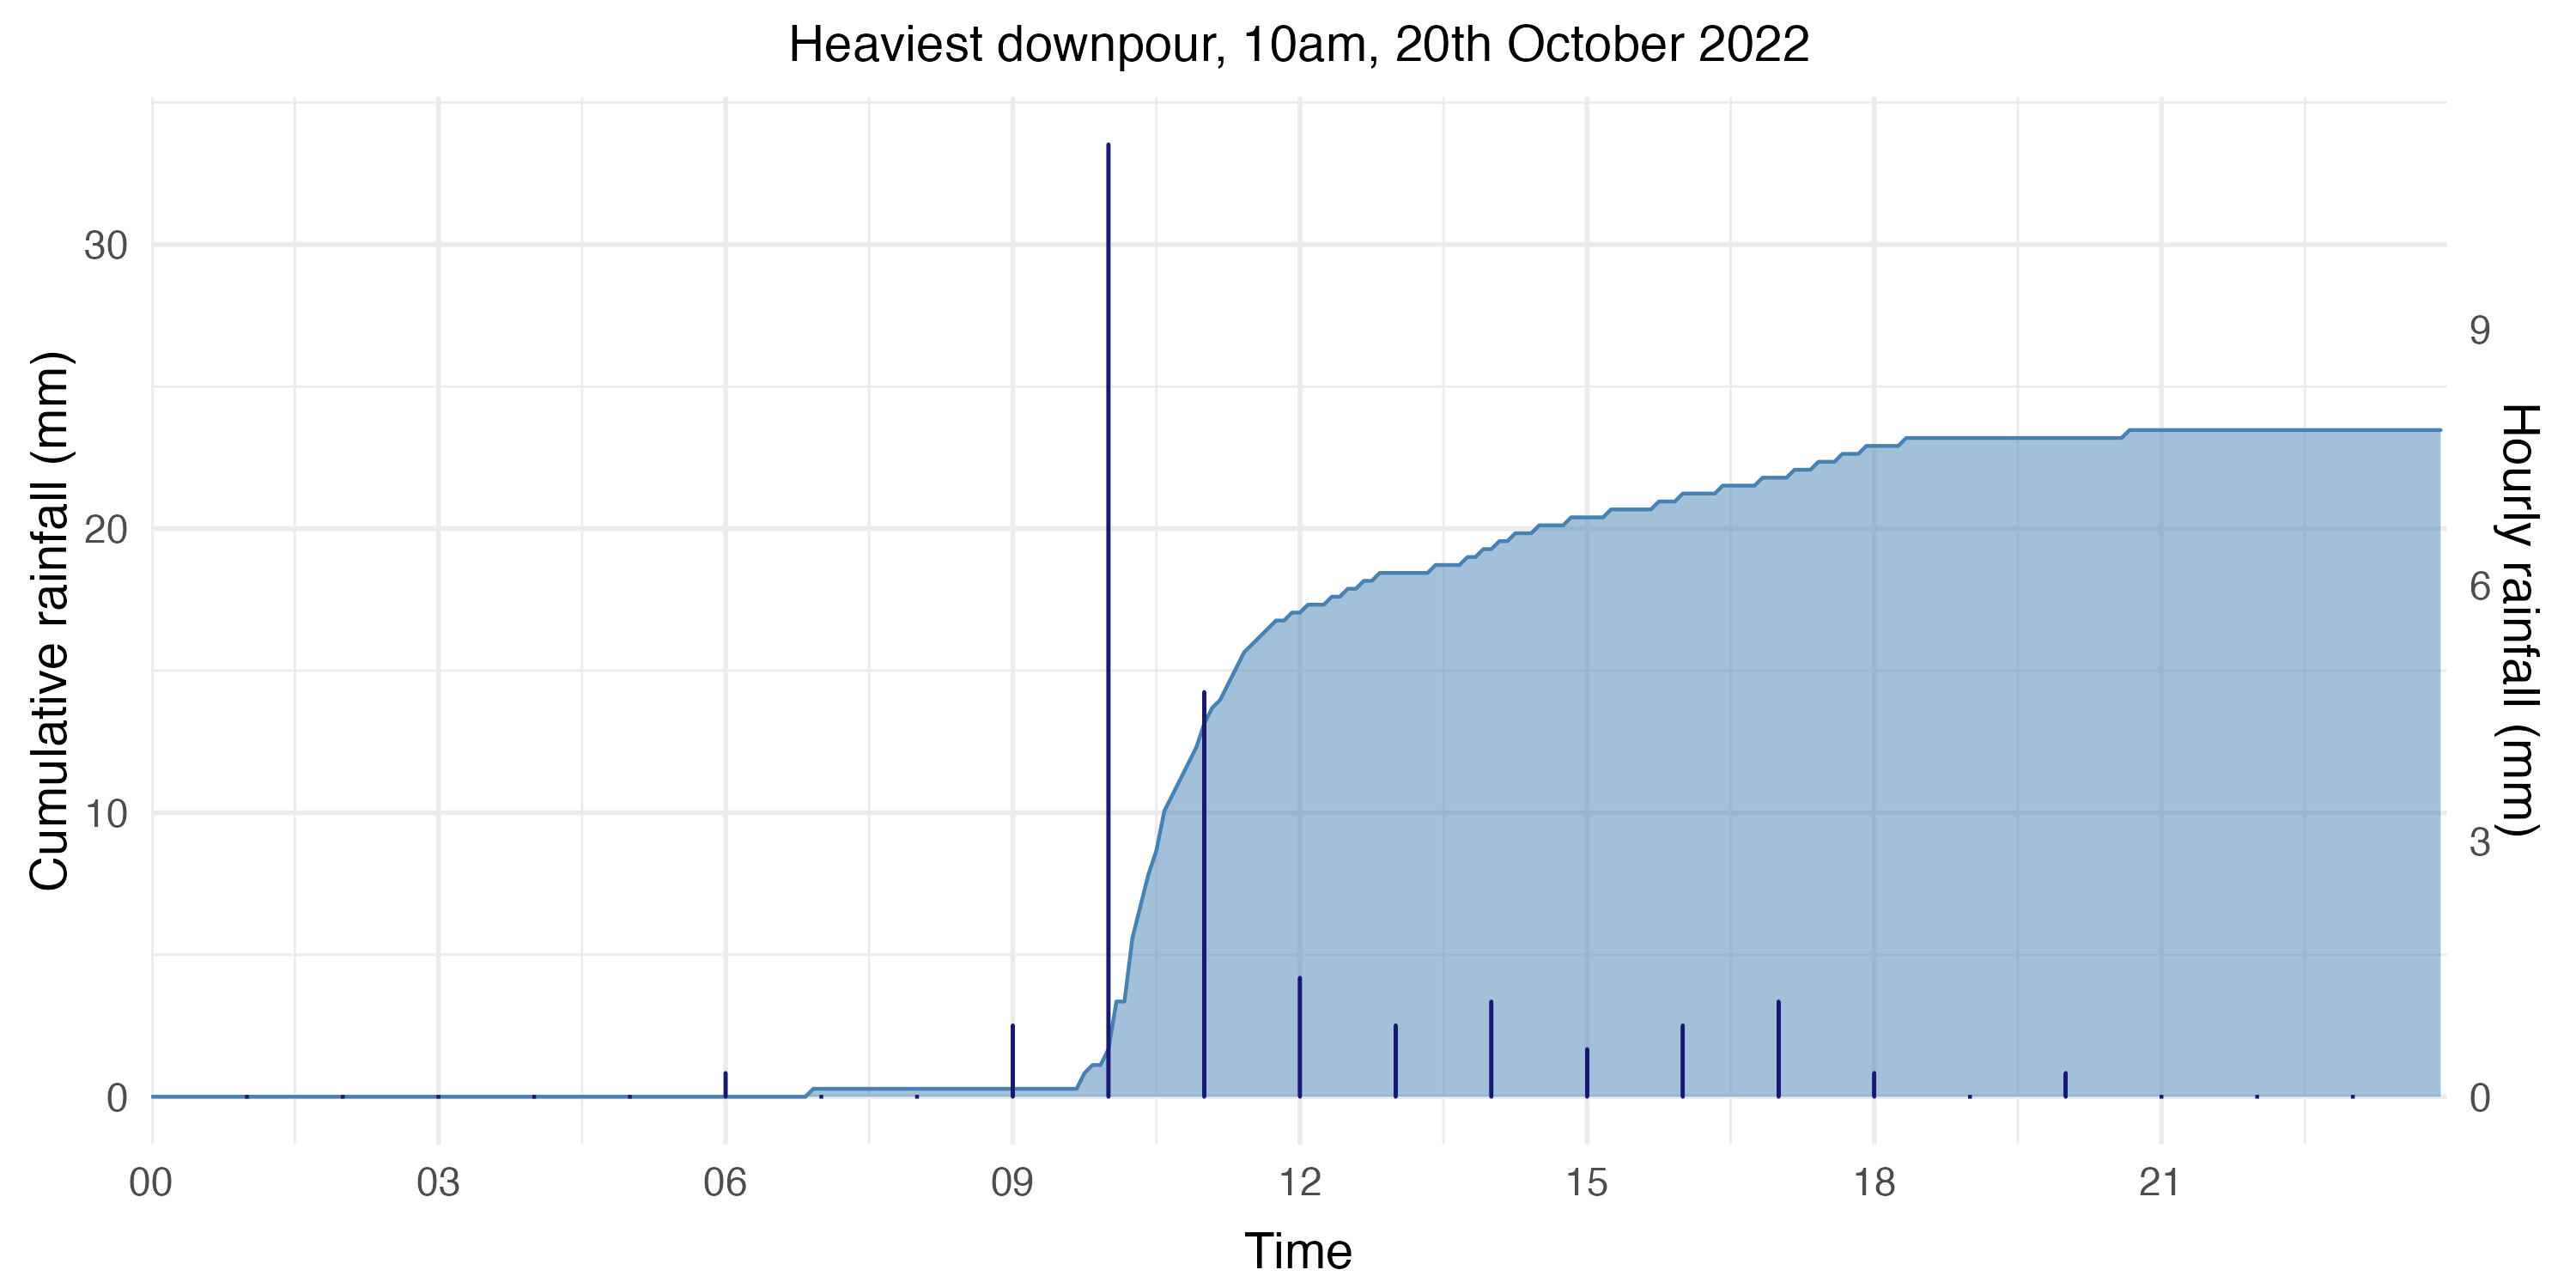 Plot of the heaviest downpour of 2022